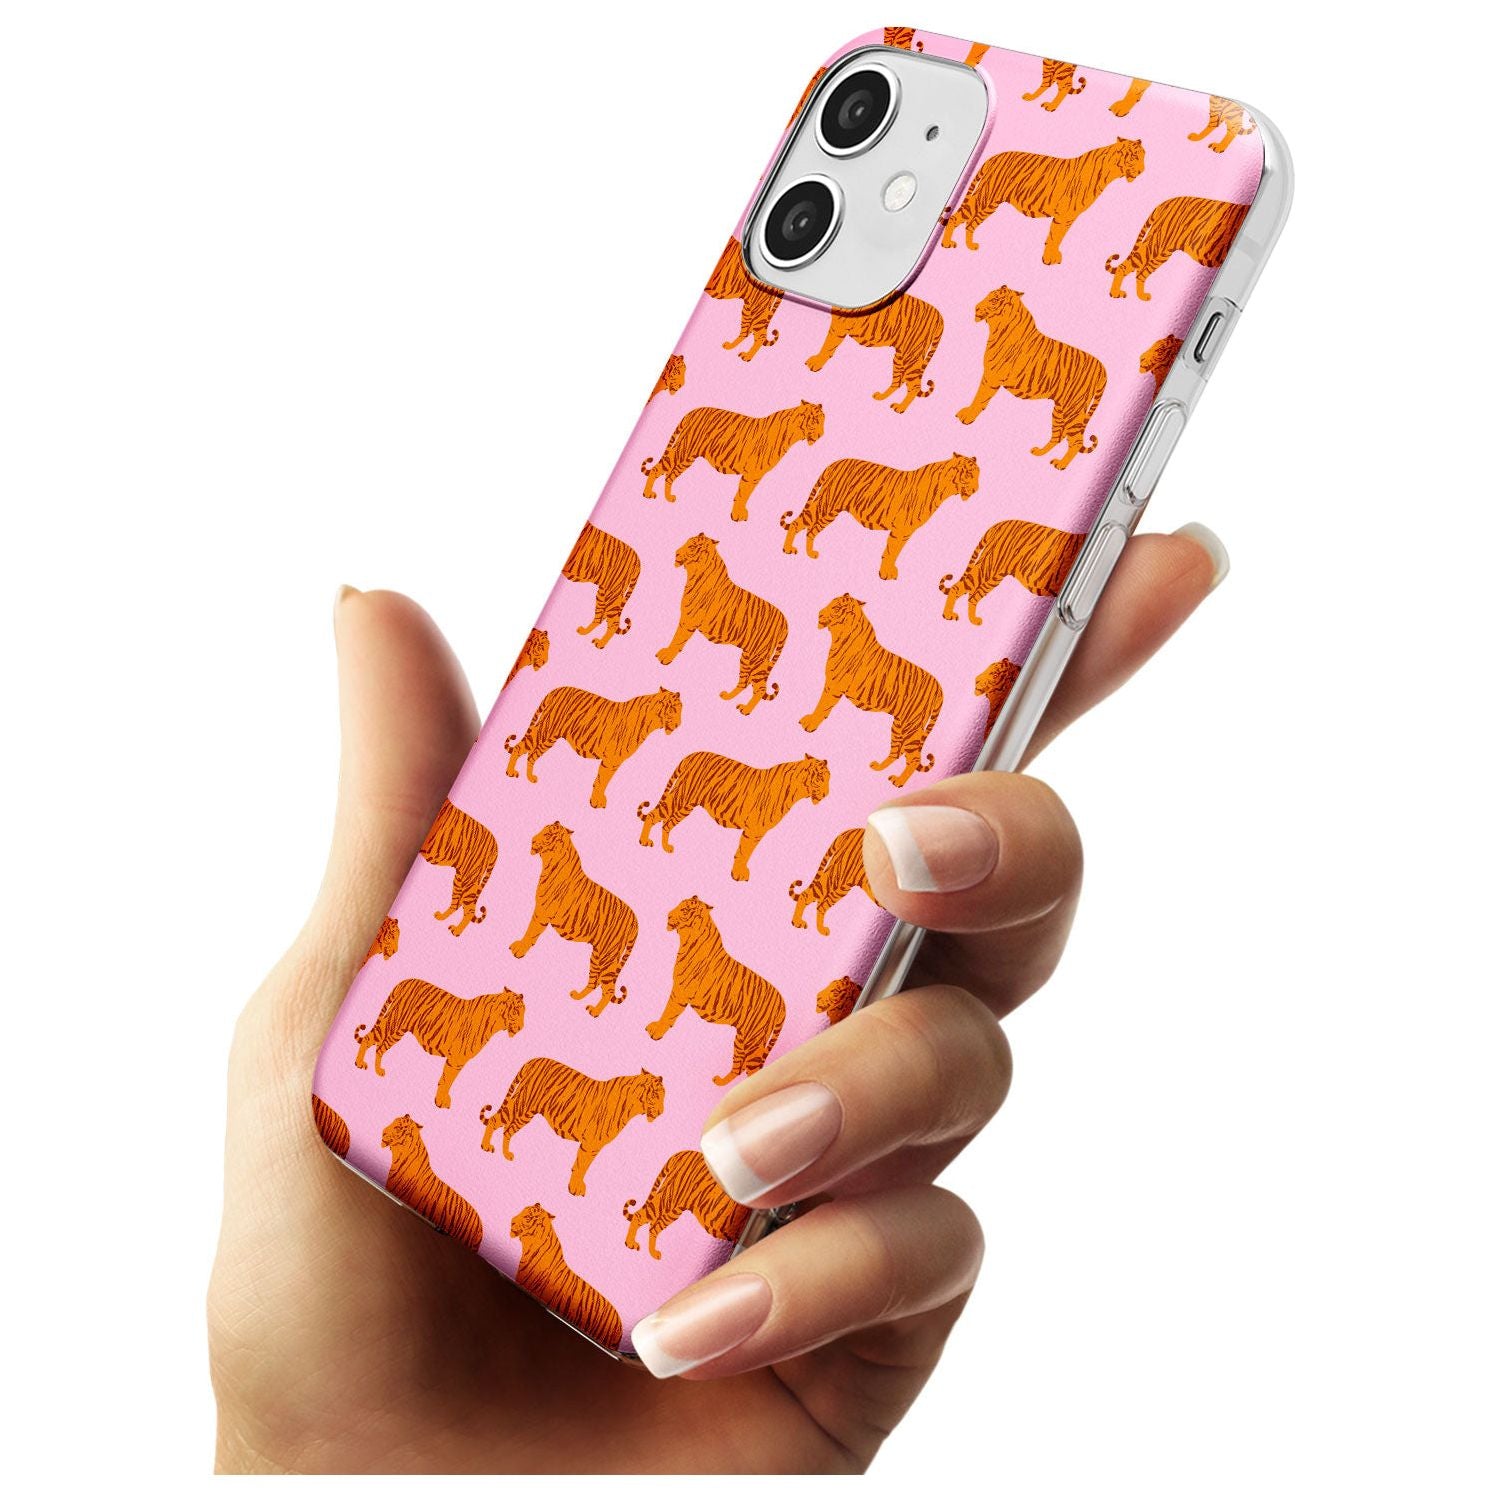 Tigers on Pink Pattern Slim TPU Phone Case for iPhone 11